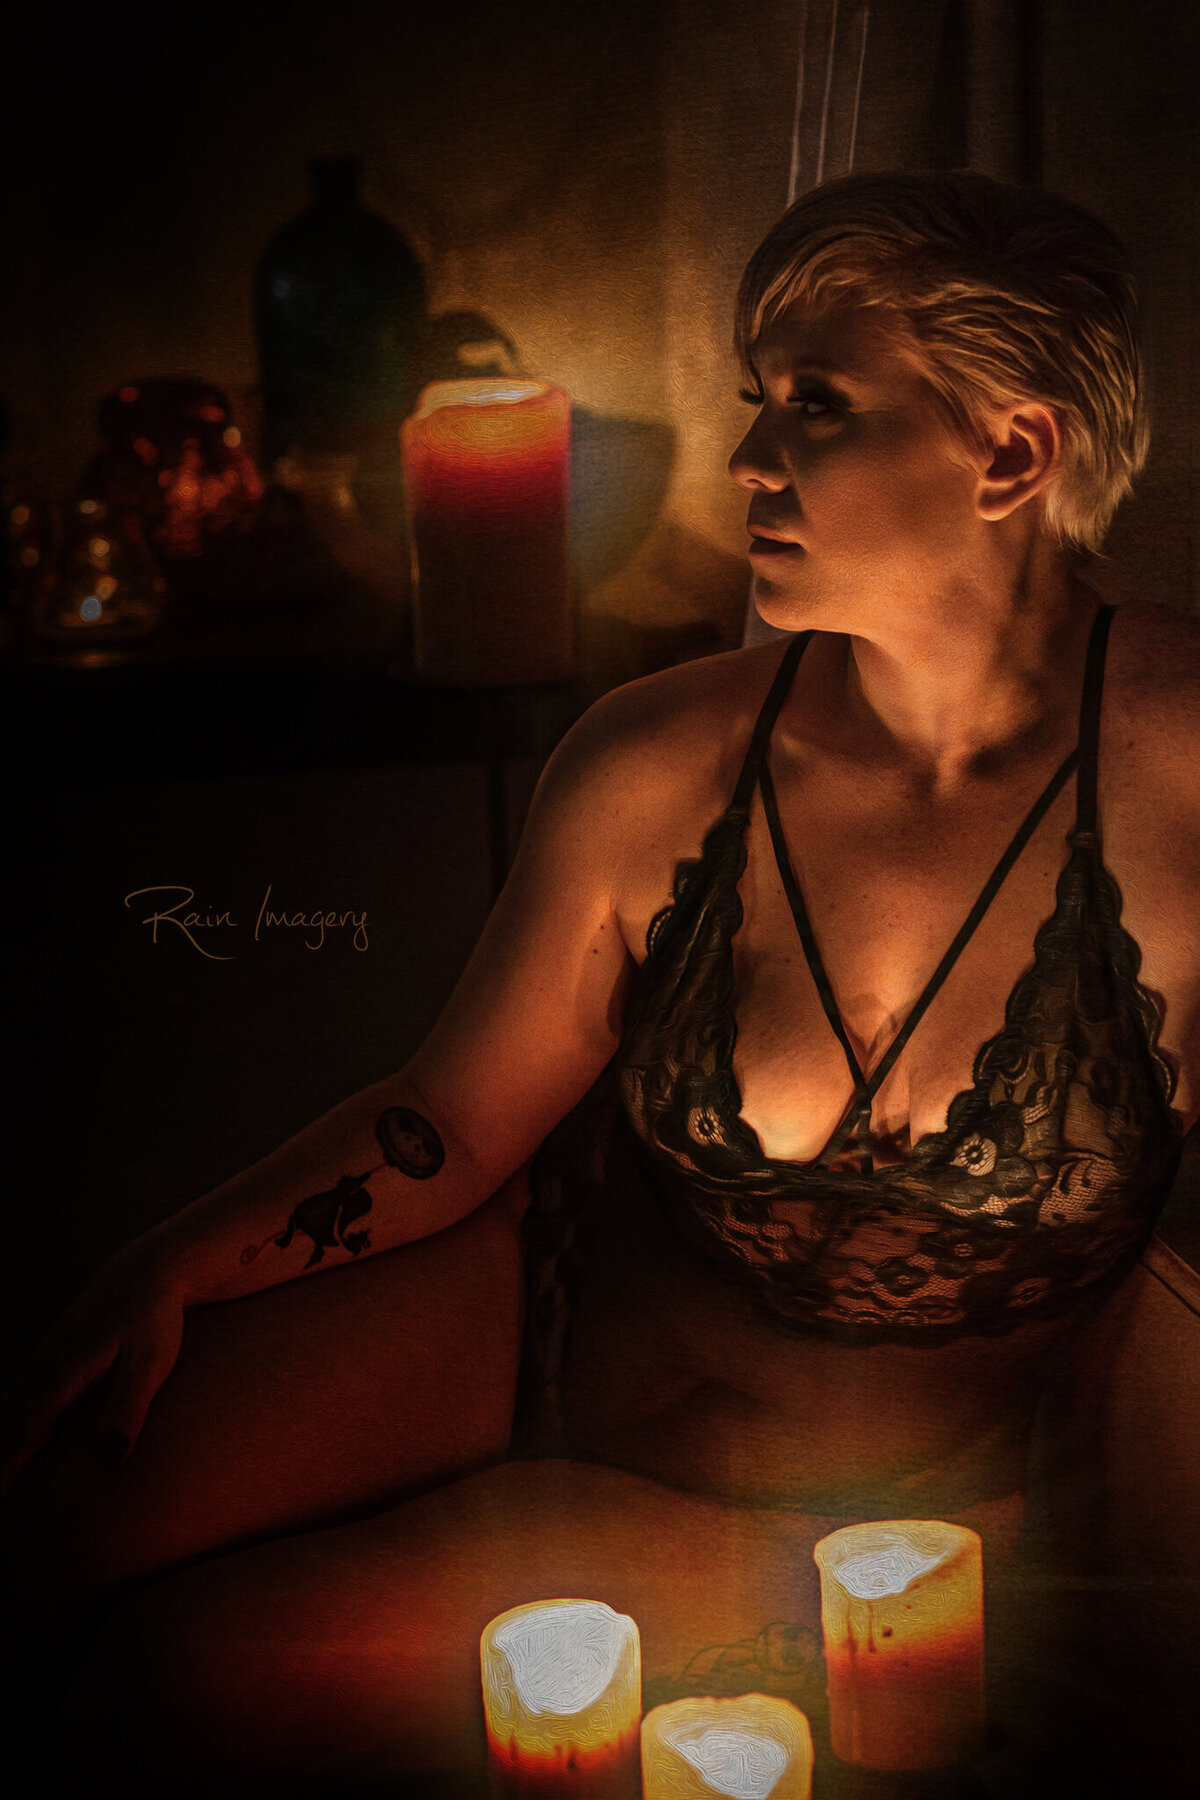 Boudoir photo of a woman with short blond hair with candles